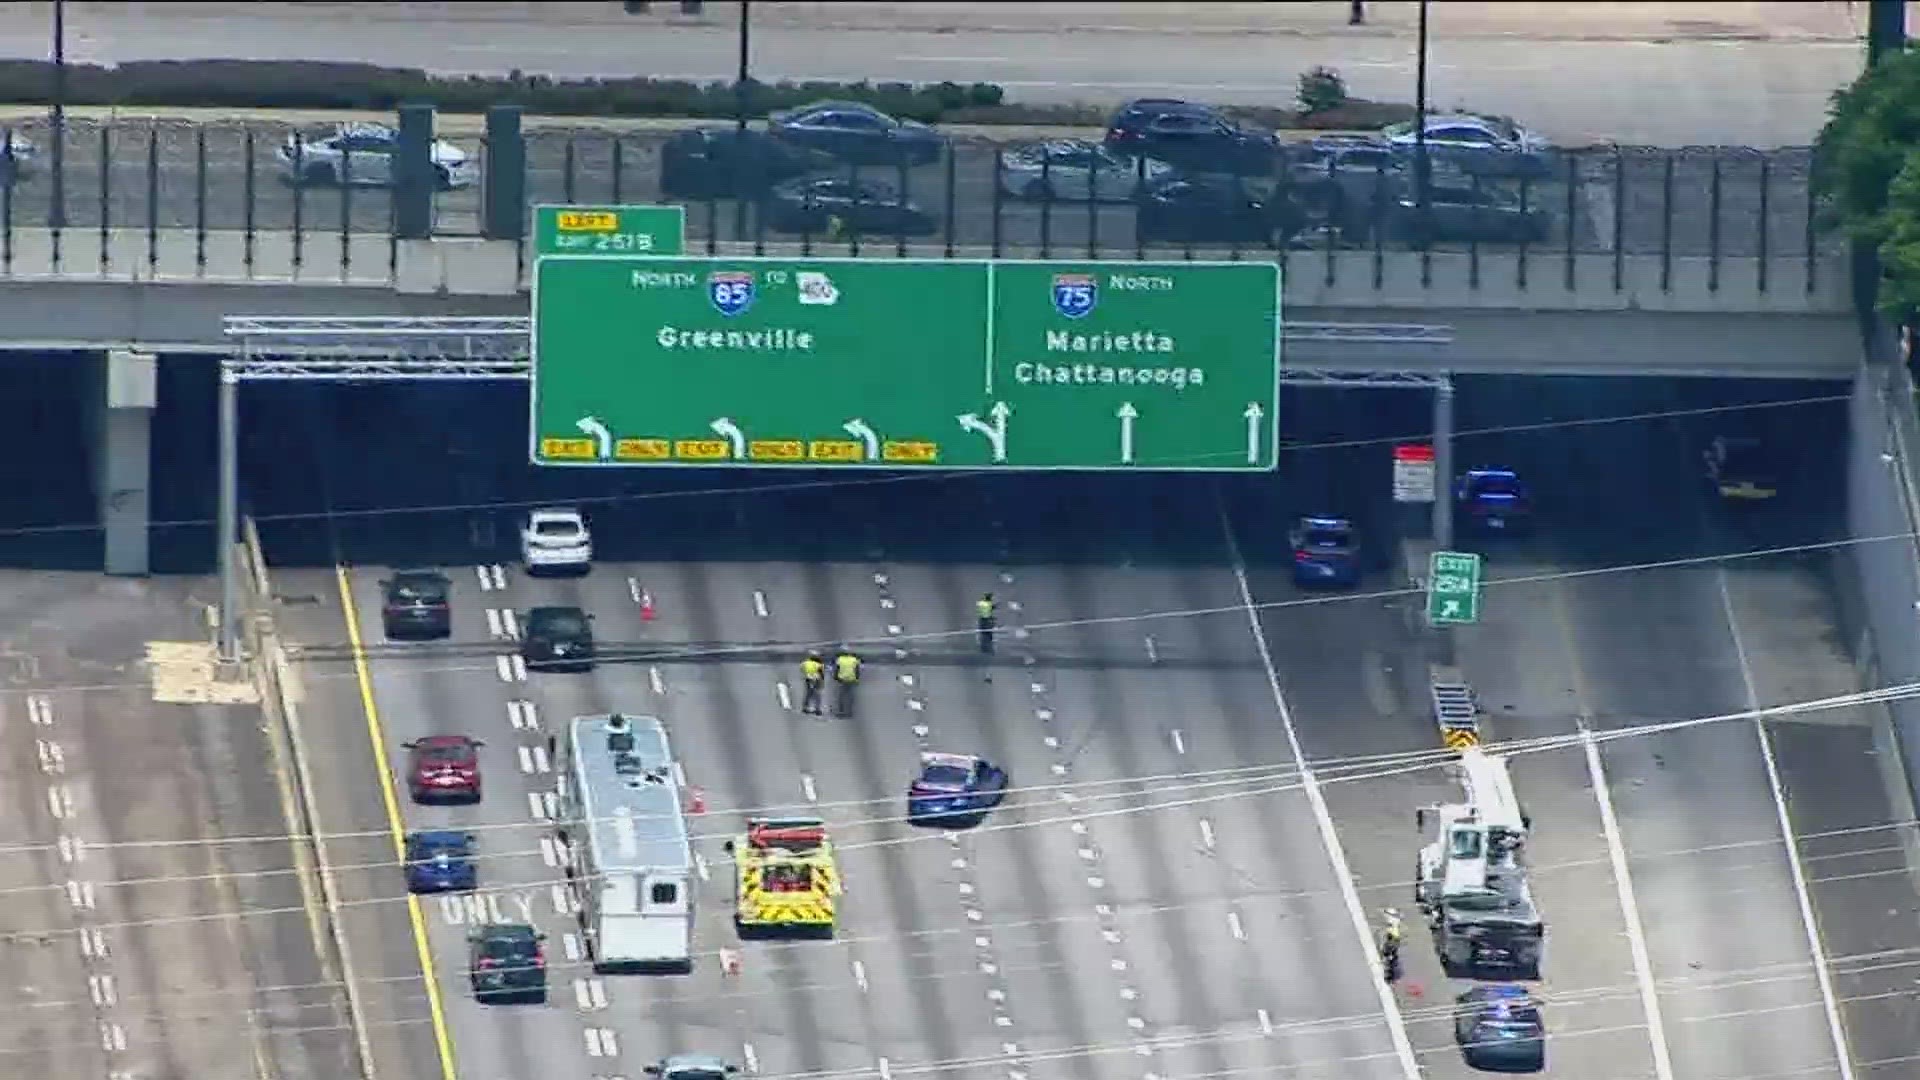 Atlanta Police said the person was walking on the shoulder of the interstate when they tried to cross all seven lanes of traffic on I-75/85 Northbound expressway.